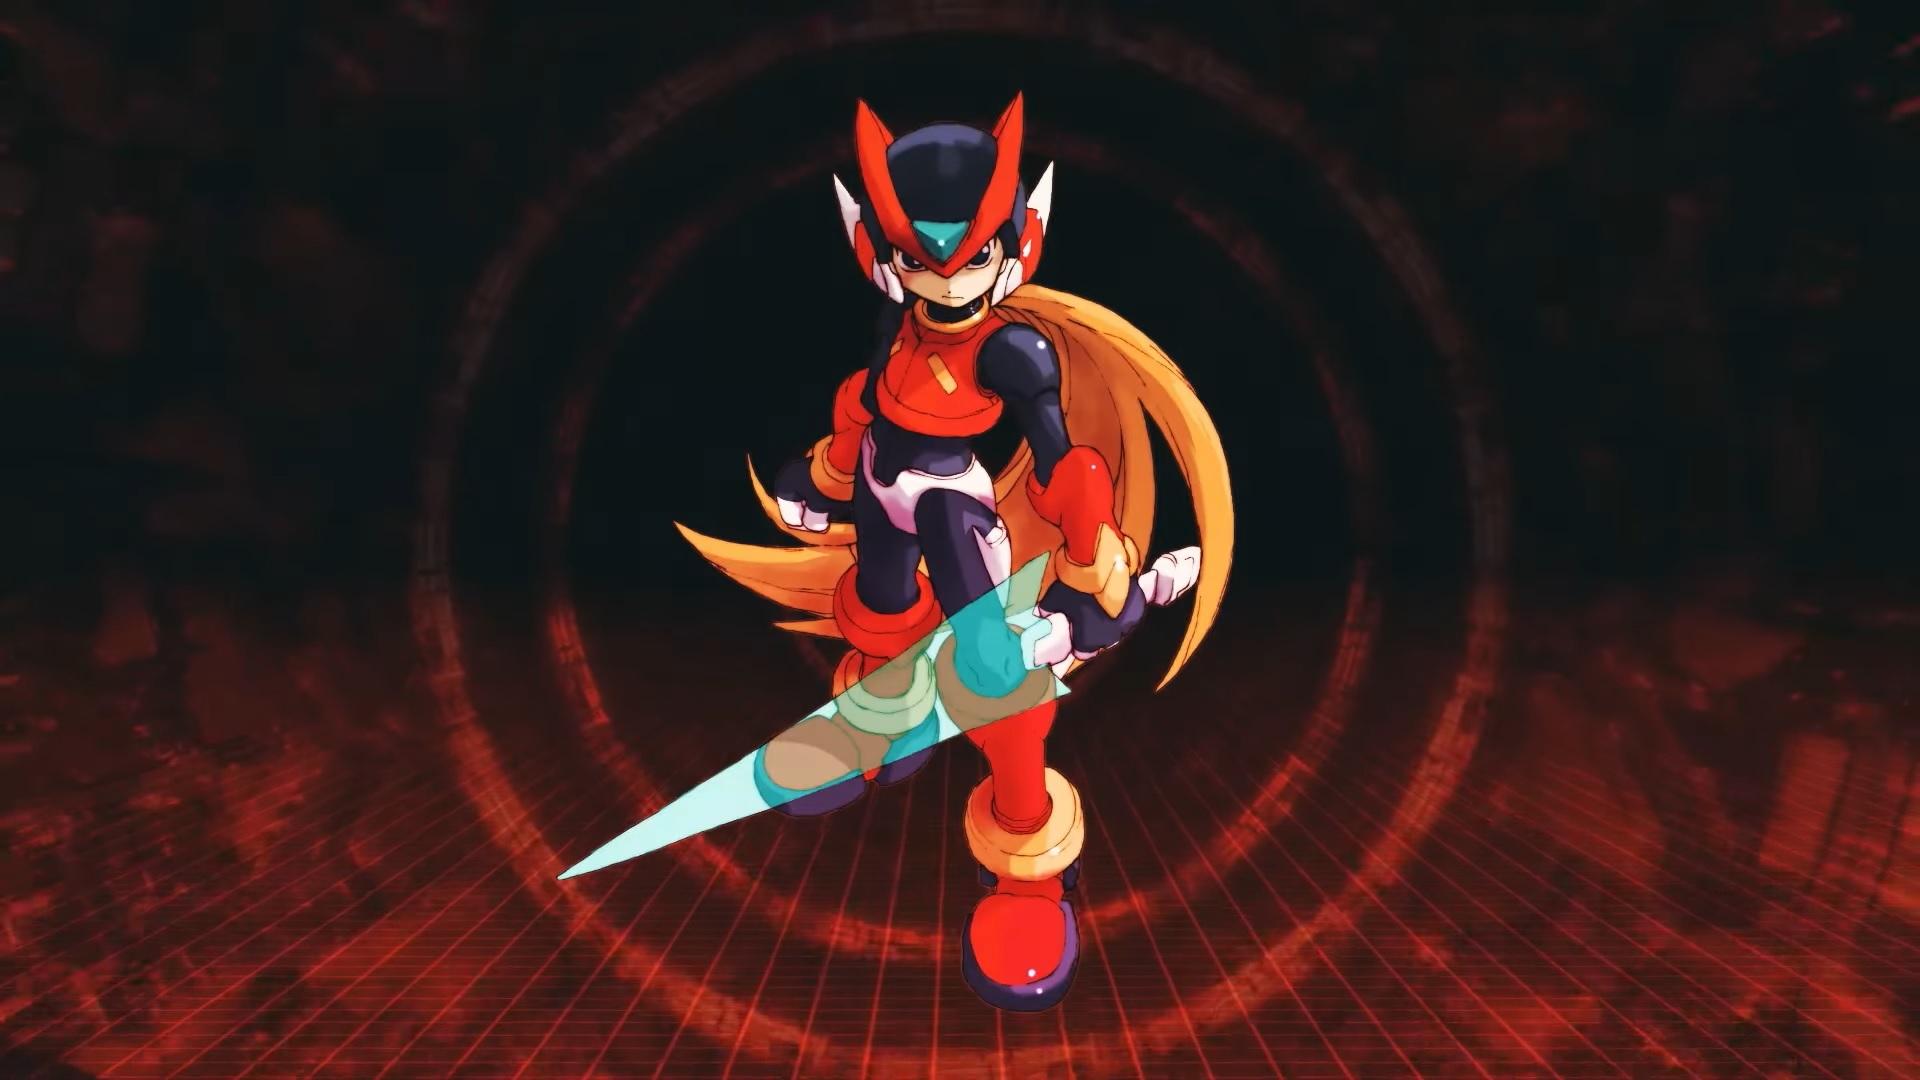 See Zero's Skills in This Mega Man Zero ZX Legacy Collection Video